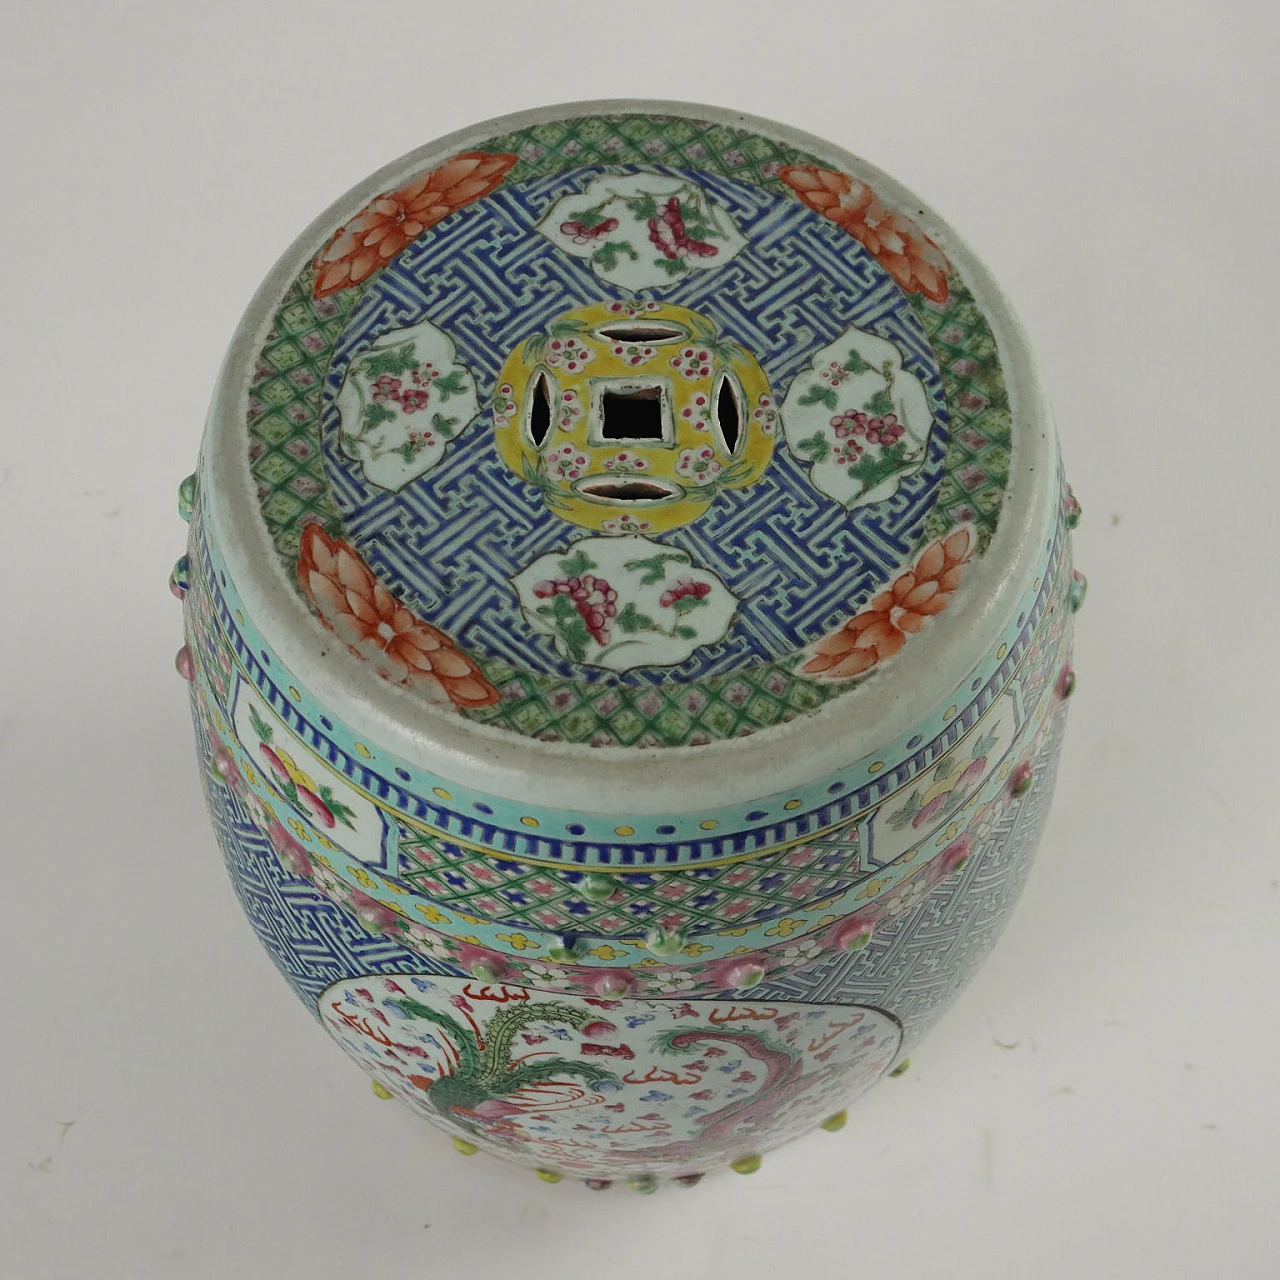 Porcelain stool decorated with dragon and phoenix, 19th century 5